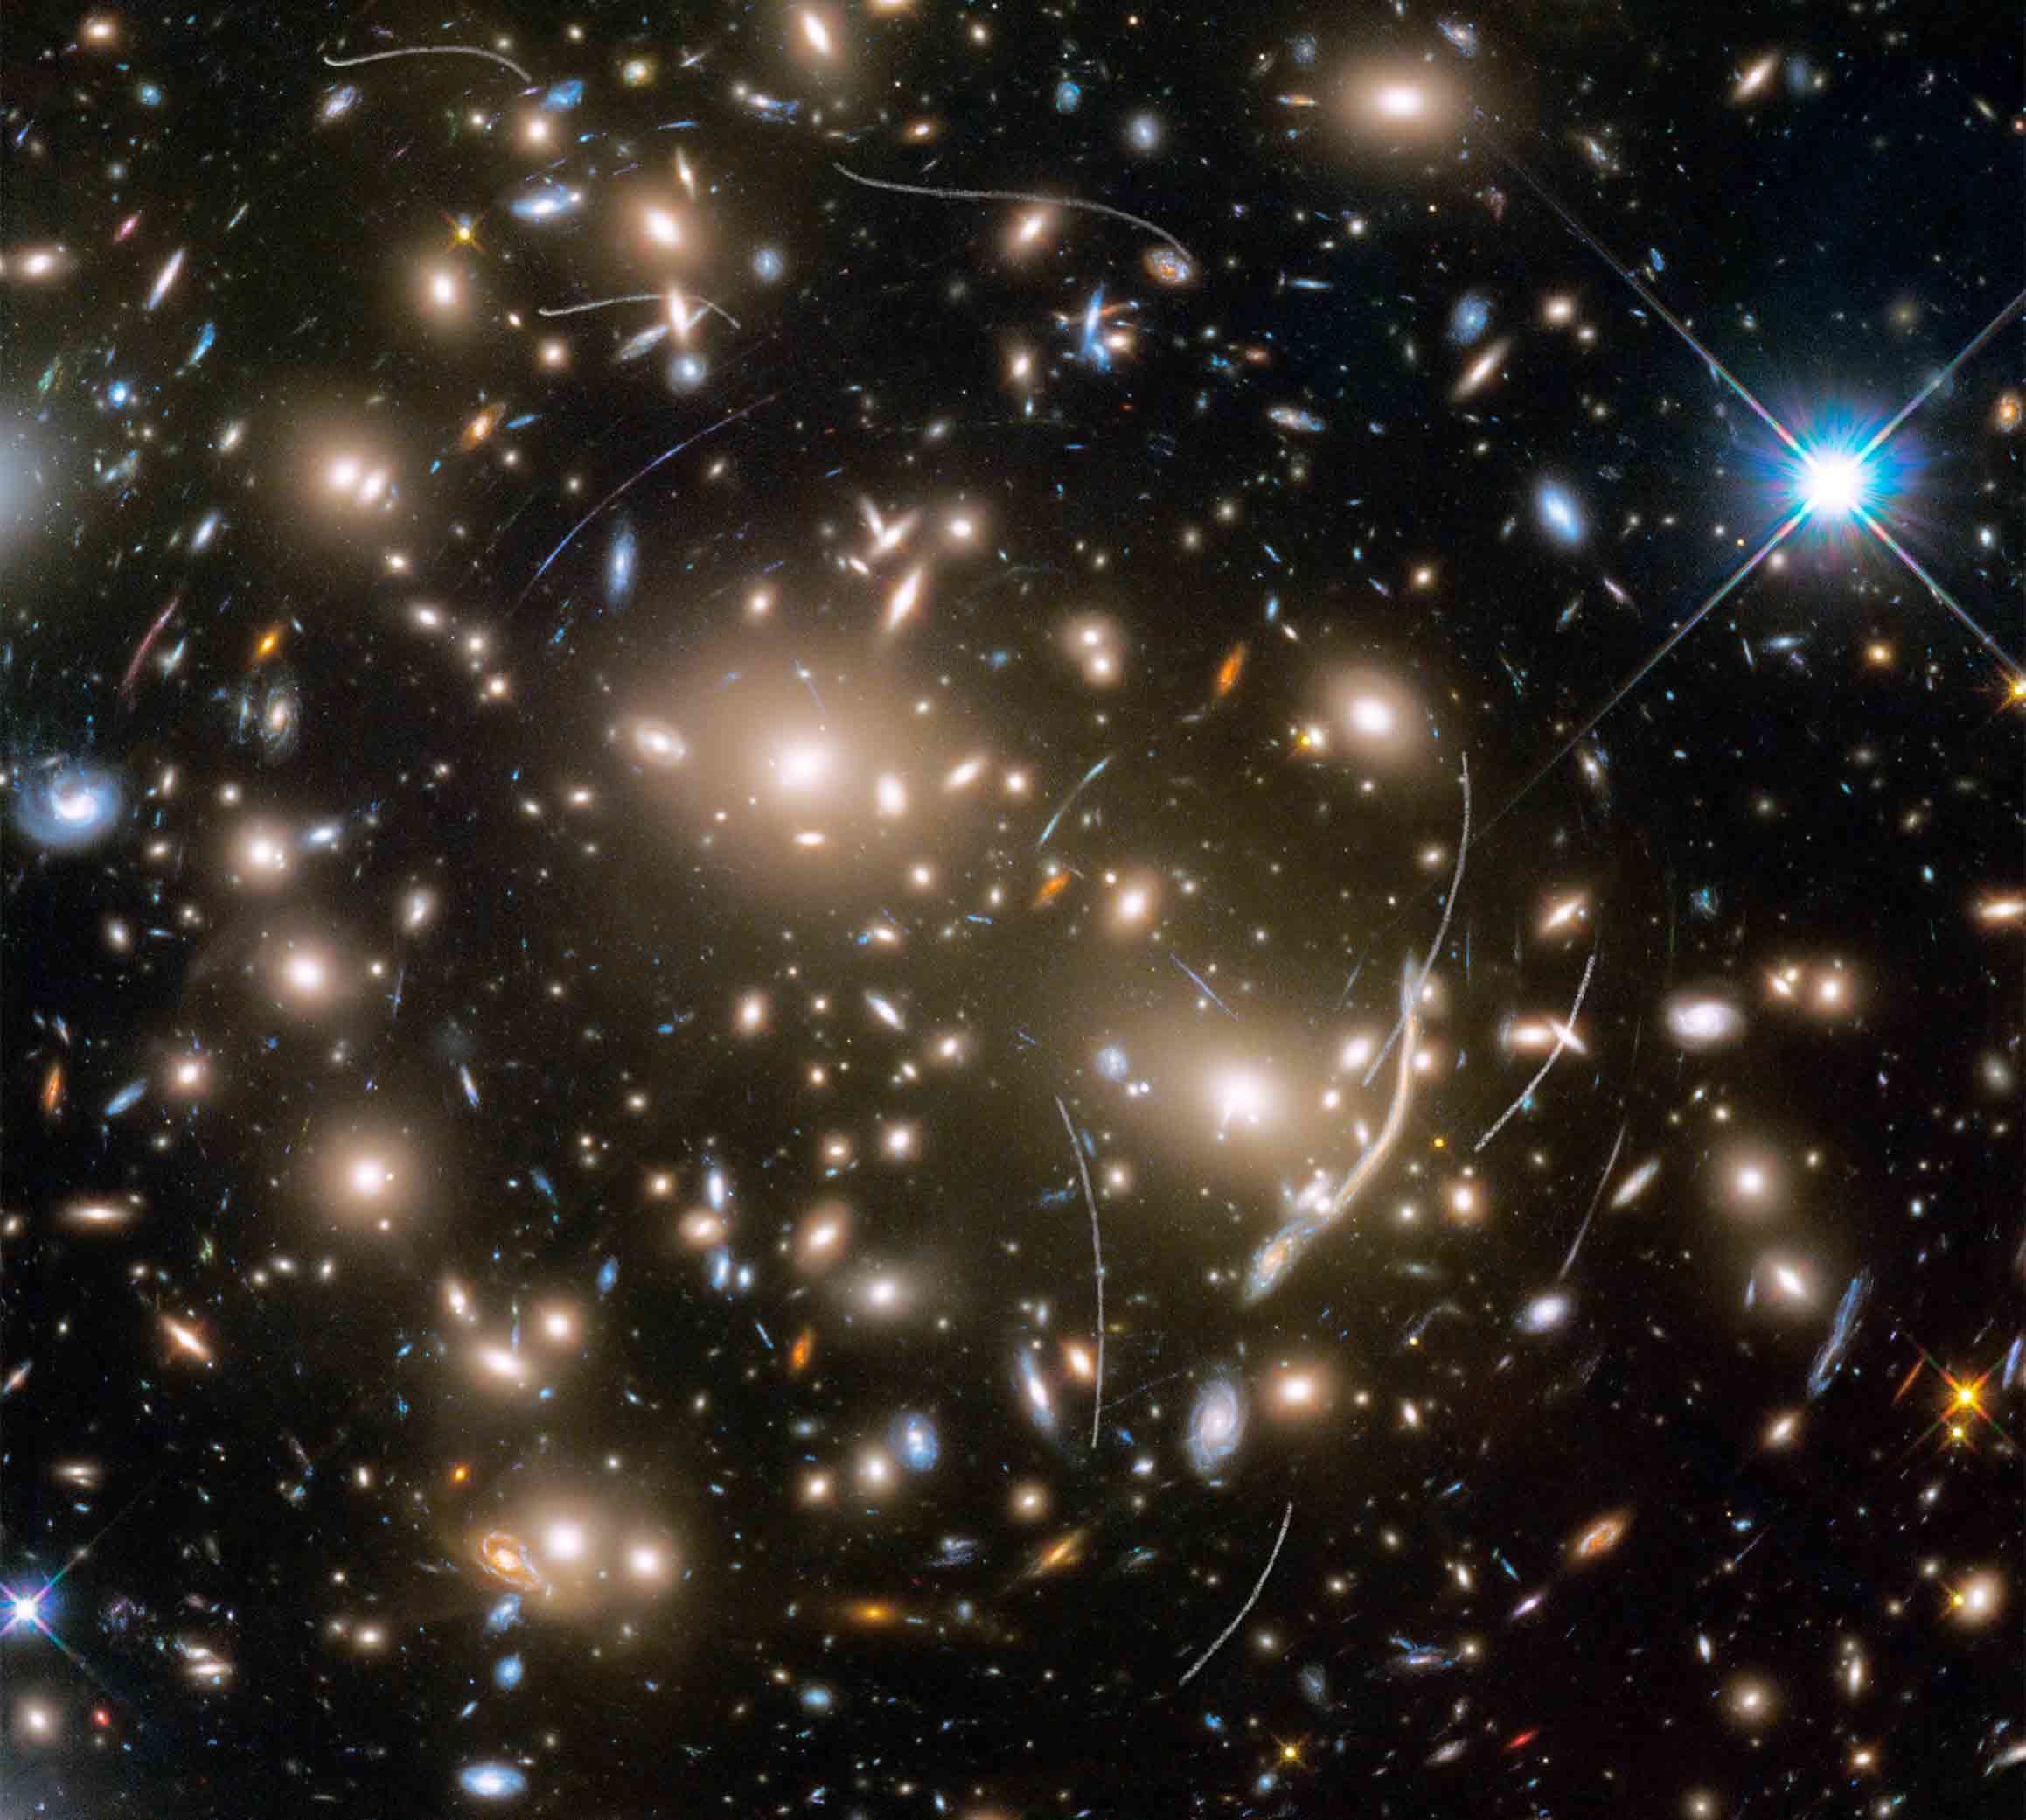 Abell 370 provides a dramatic backdrop for quite a few asteroids, seen as curved tracks in this Hubble image. Credit: NASA, ESA, and B. Sunnquist and J. Mack (STScI) Acknowledgment: NASA, ESA, and J. Lotz (STScI) and the HFF Team